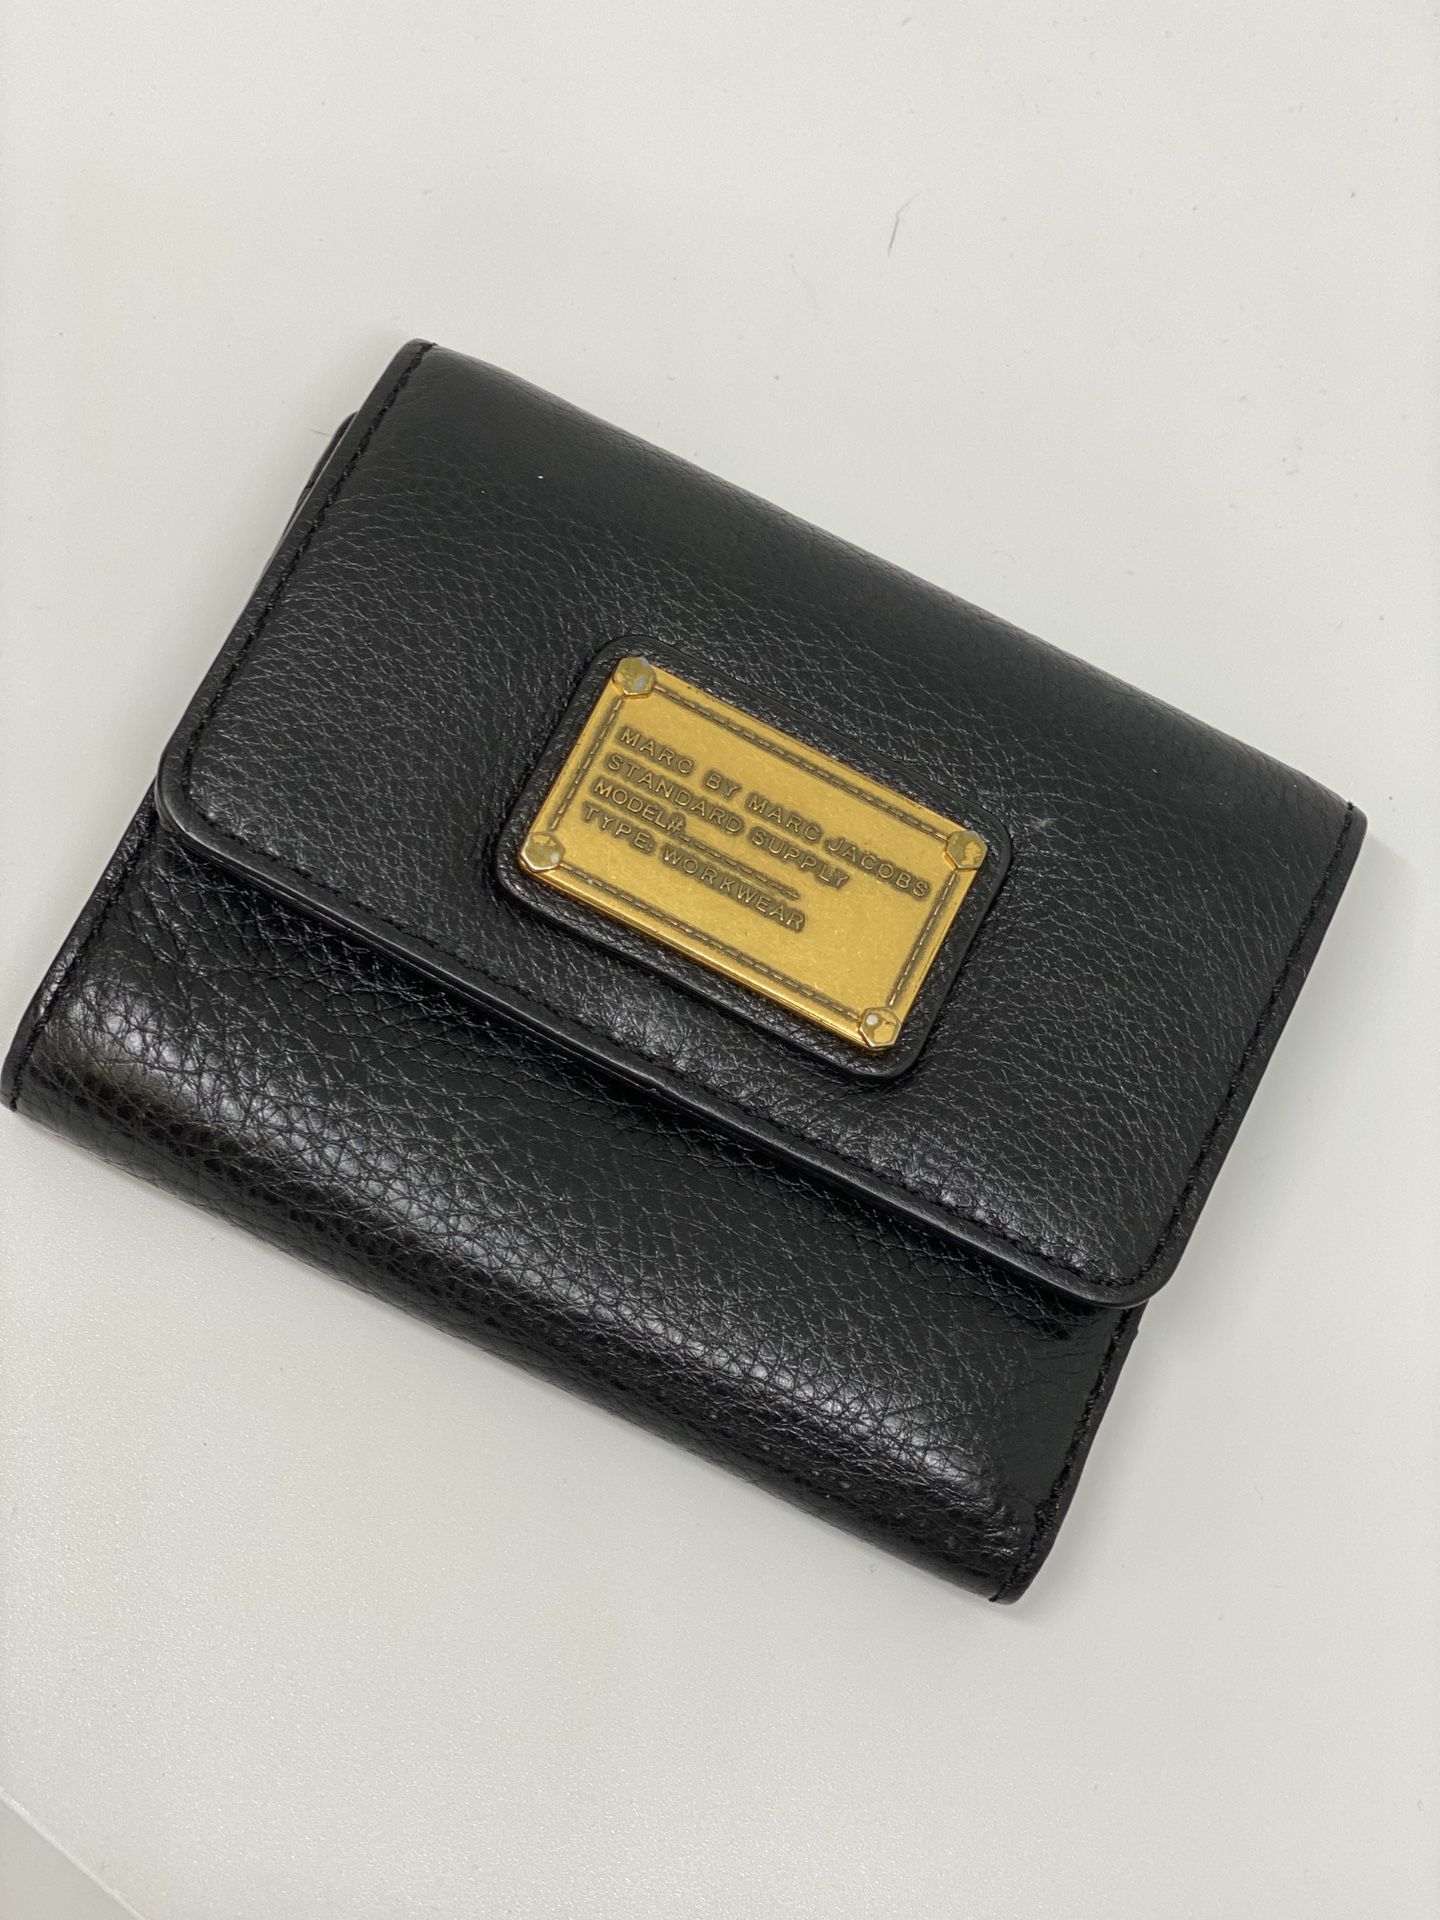 MARC JACOBS Black TriFold Leather Wallet